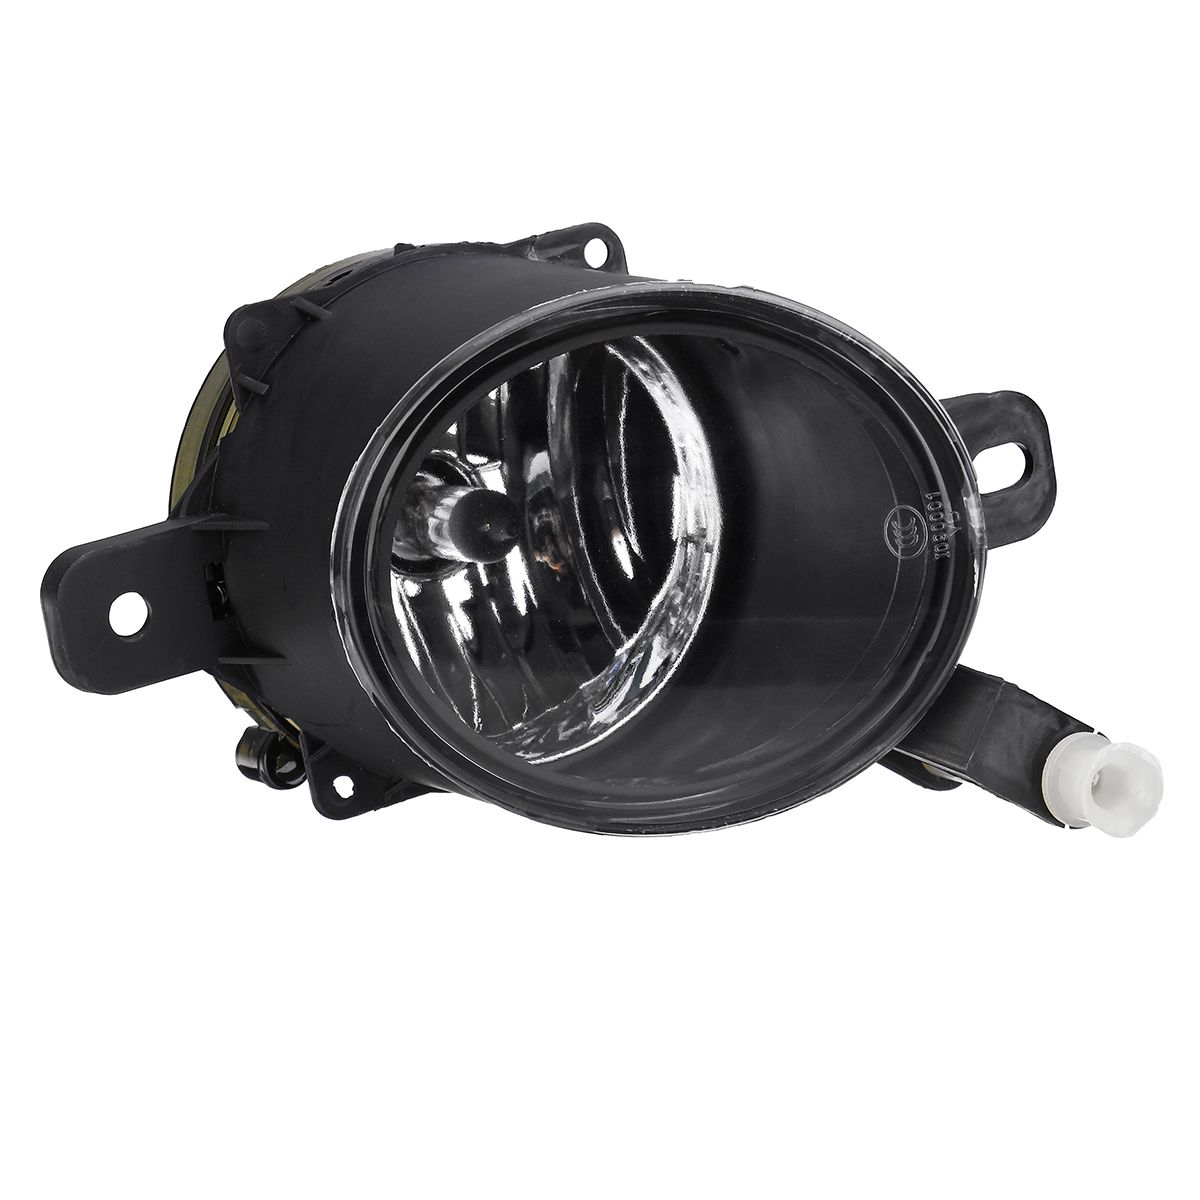 Front-Right-Car-Halogen-Fog-Driving-Lights-Lamp-for-Saturn-Astra-Cadillac-SRX-Chevy-Malibu-SS-1382547